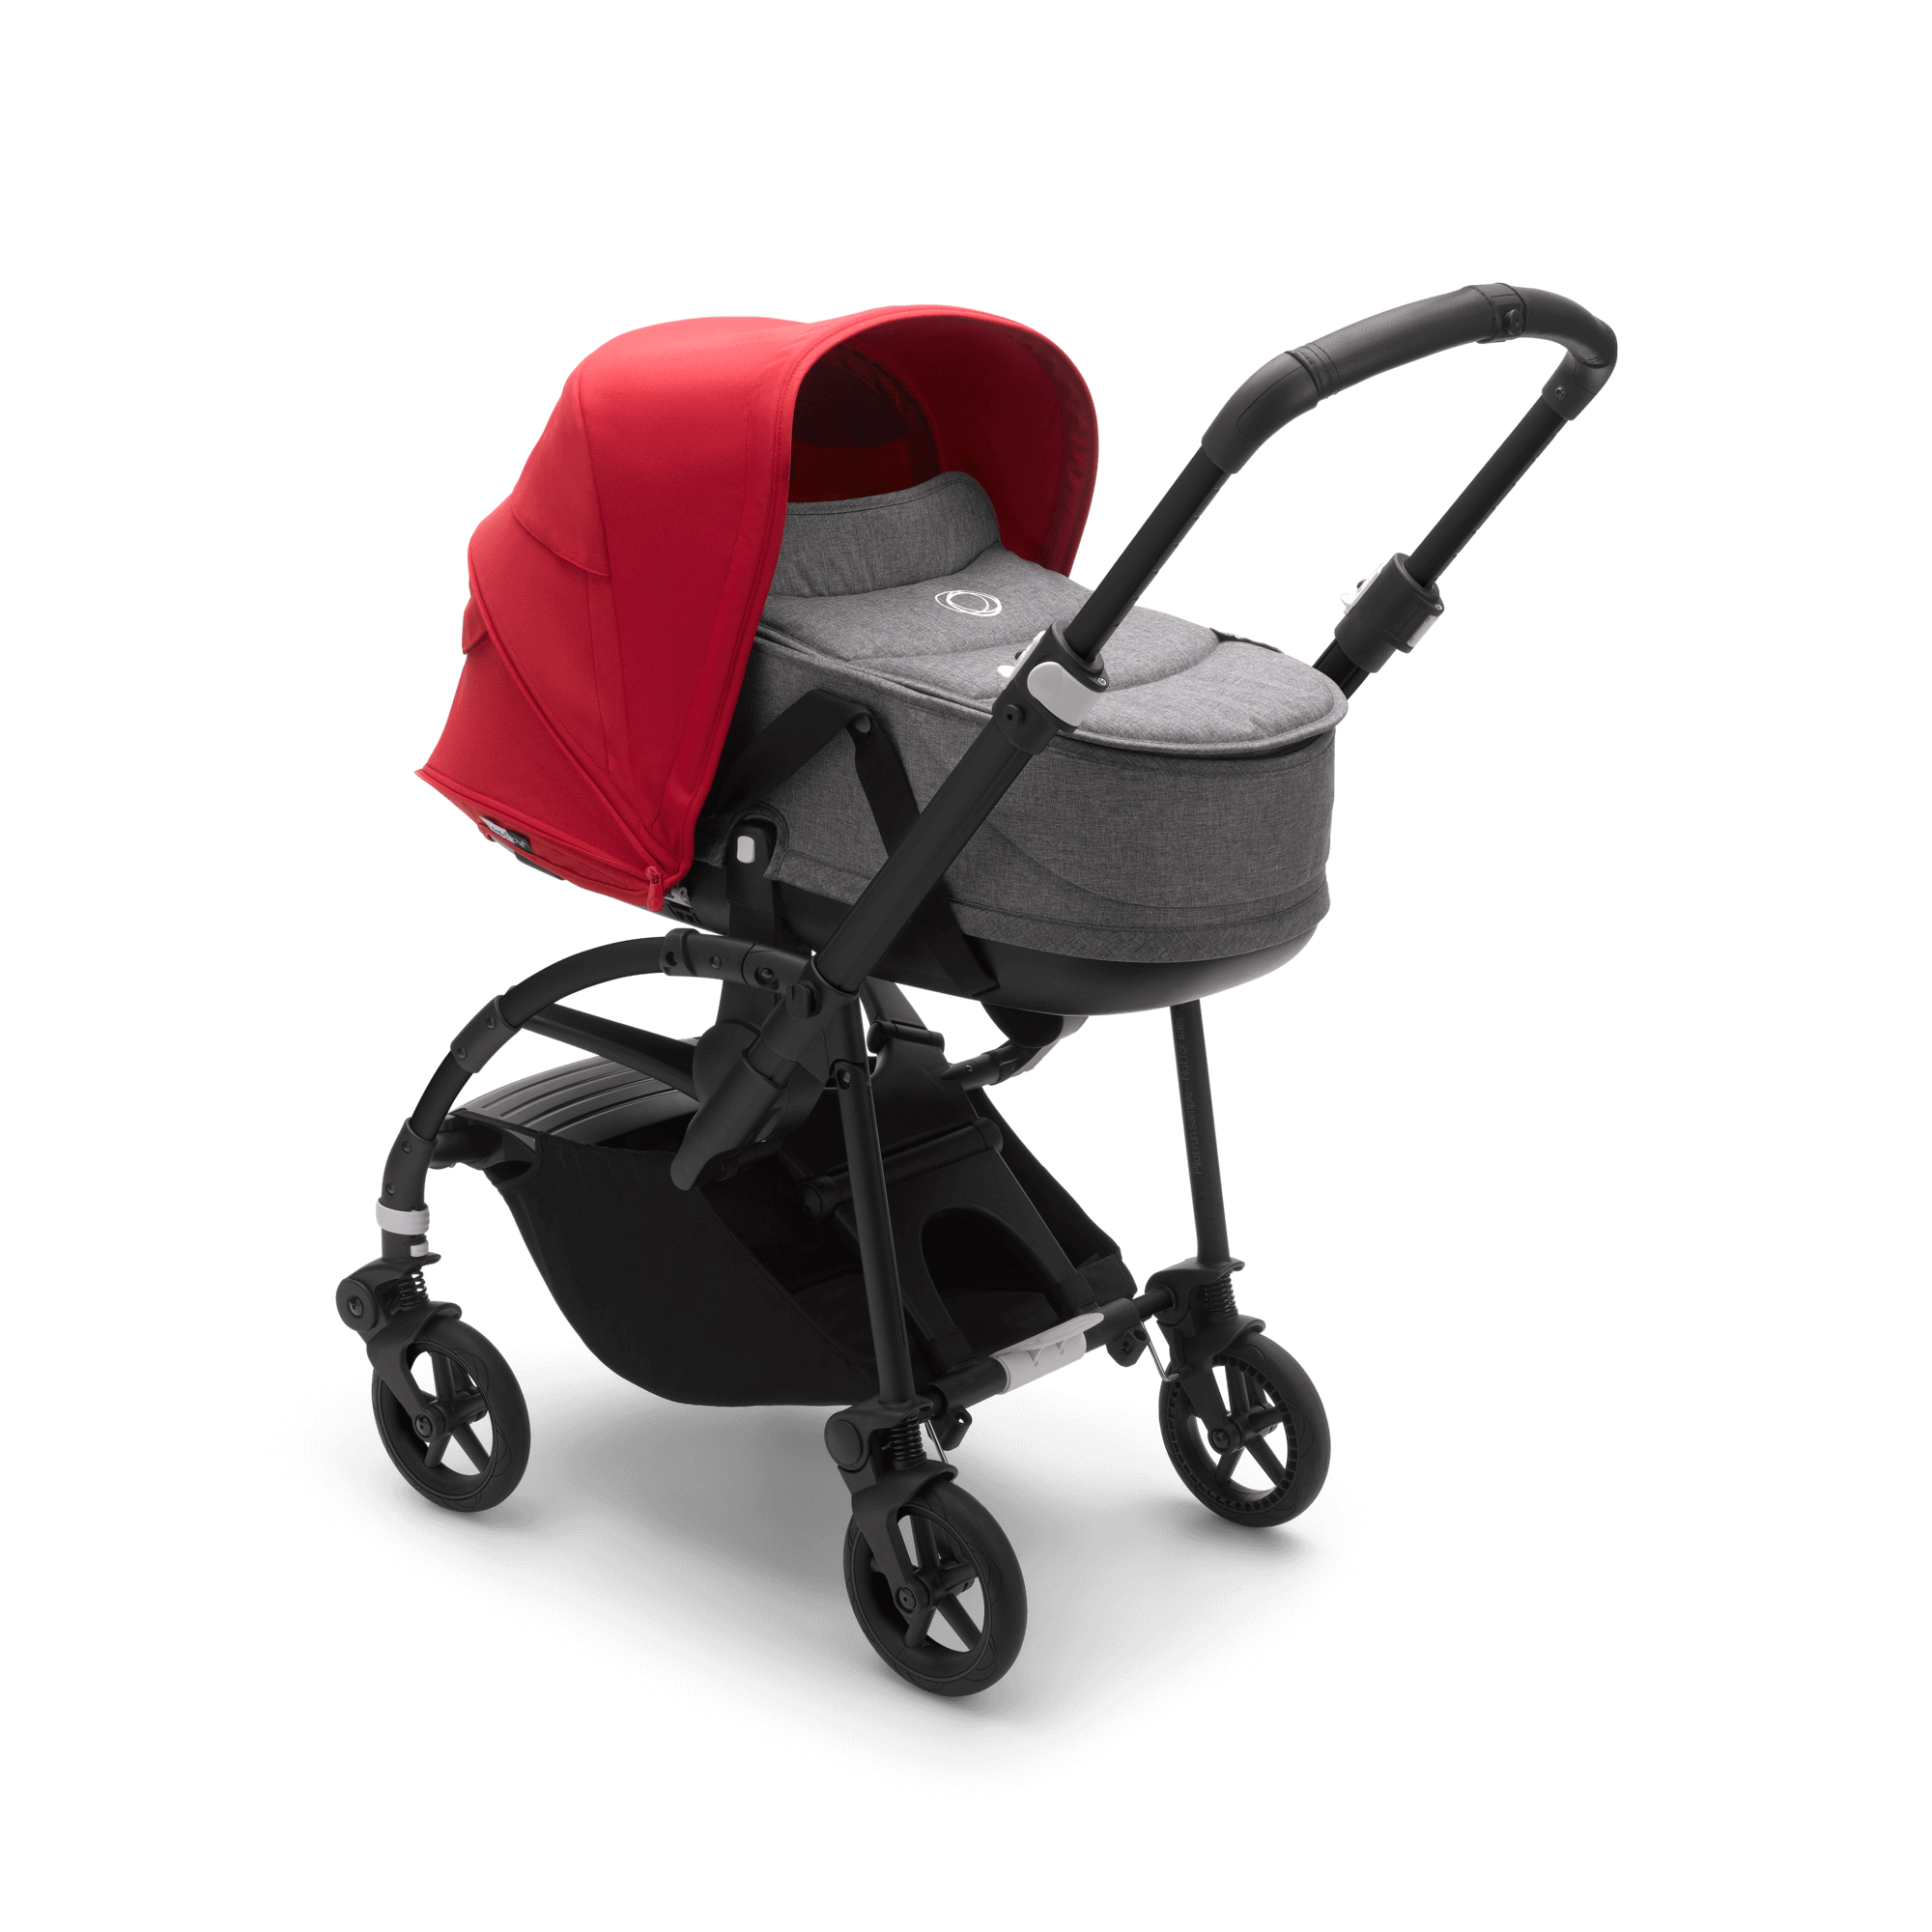 Bugaboo Bee 6 bassinet and seat stroller red sun canopy grey mélange fabrics black base